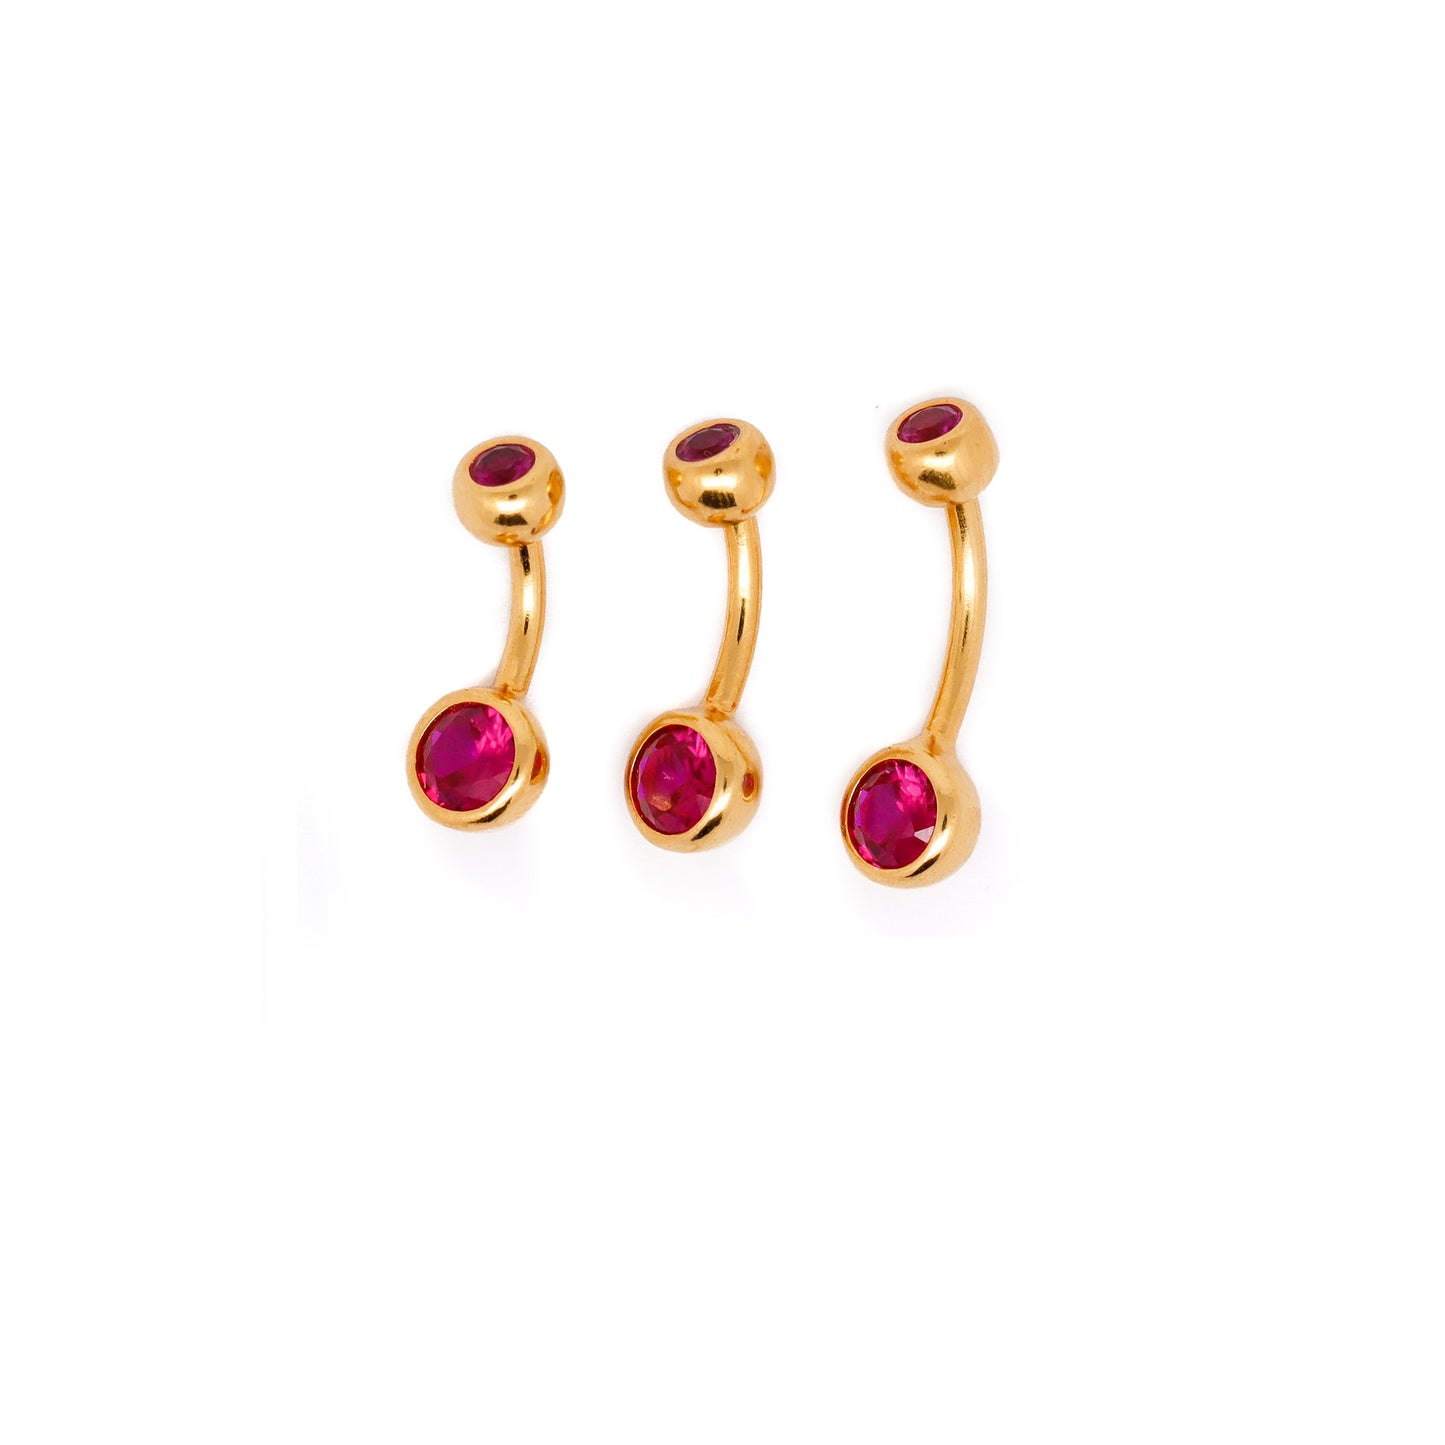 Vermeil | 24k Gold Coated 925 Silver Small Belly Ring with Berry Pink Cubic Zirconia Crystals | 6mm 1/4" 8mm 5/16" 10mm 3/8" - Sturdy South